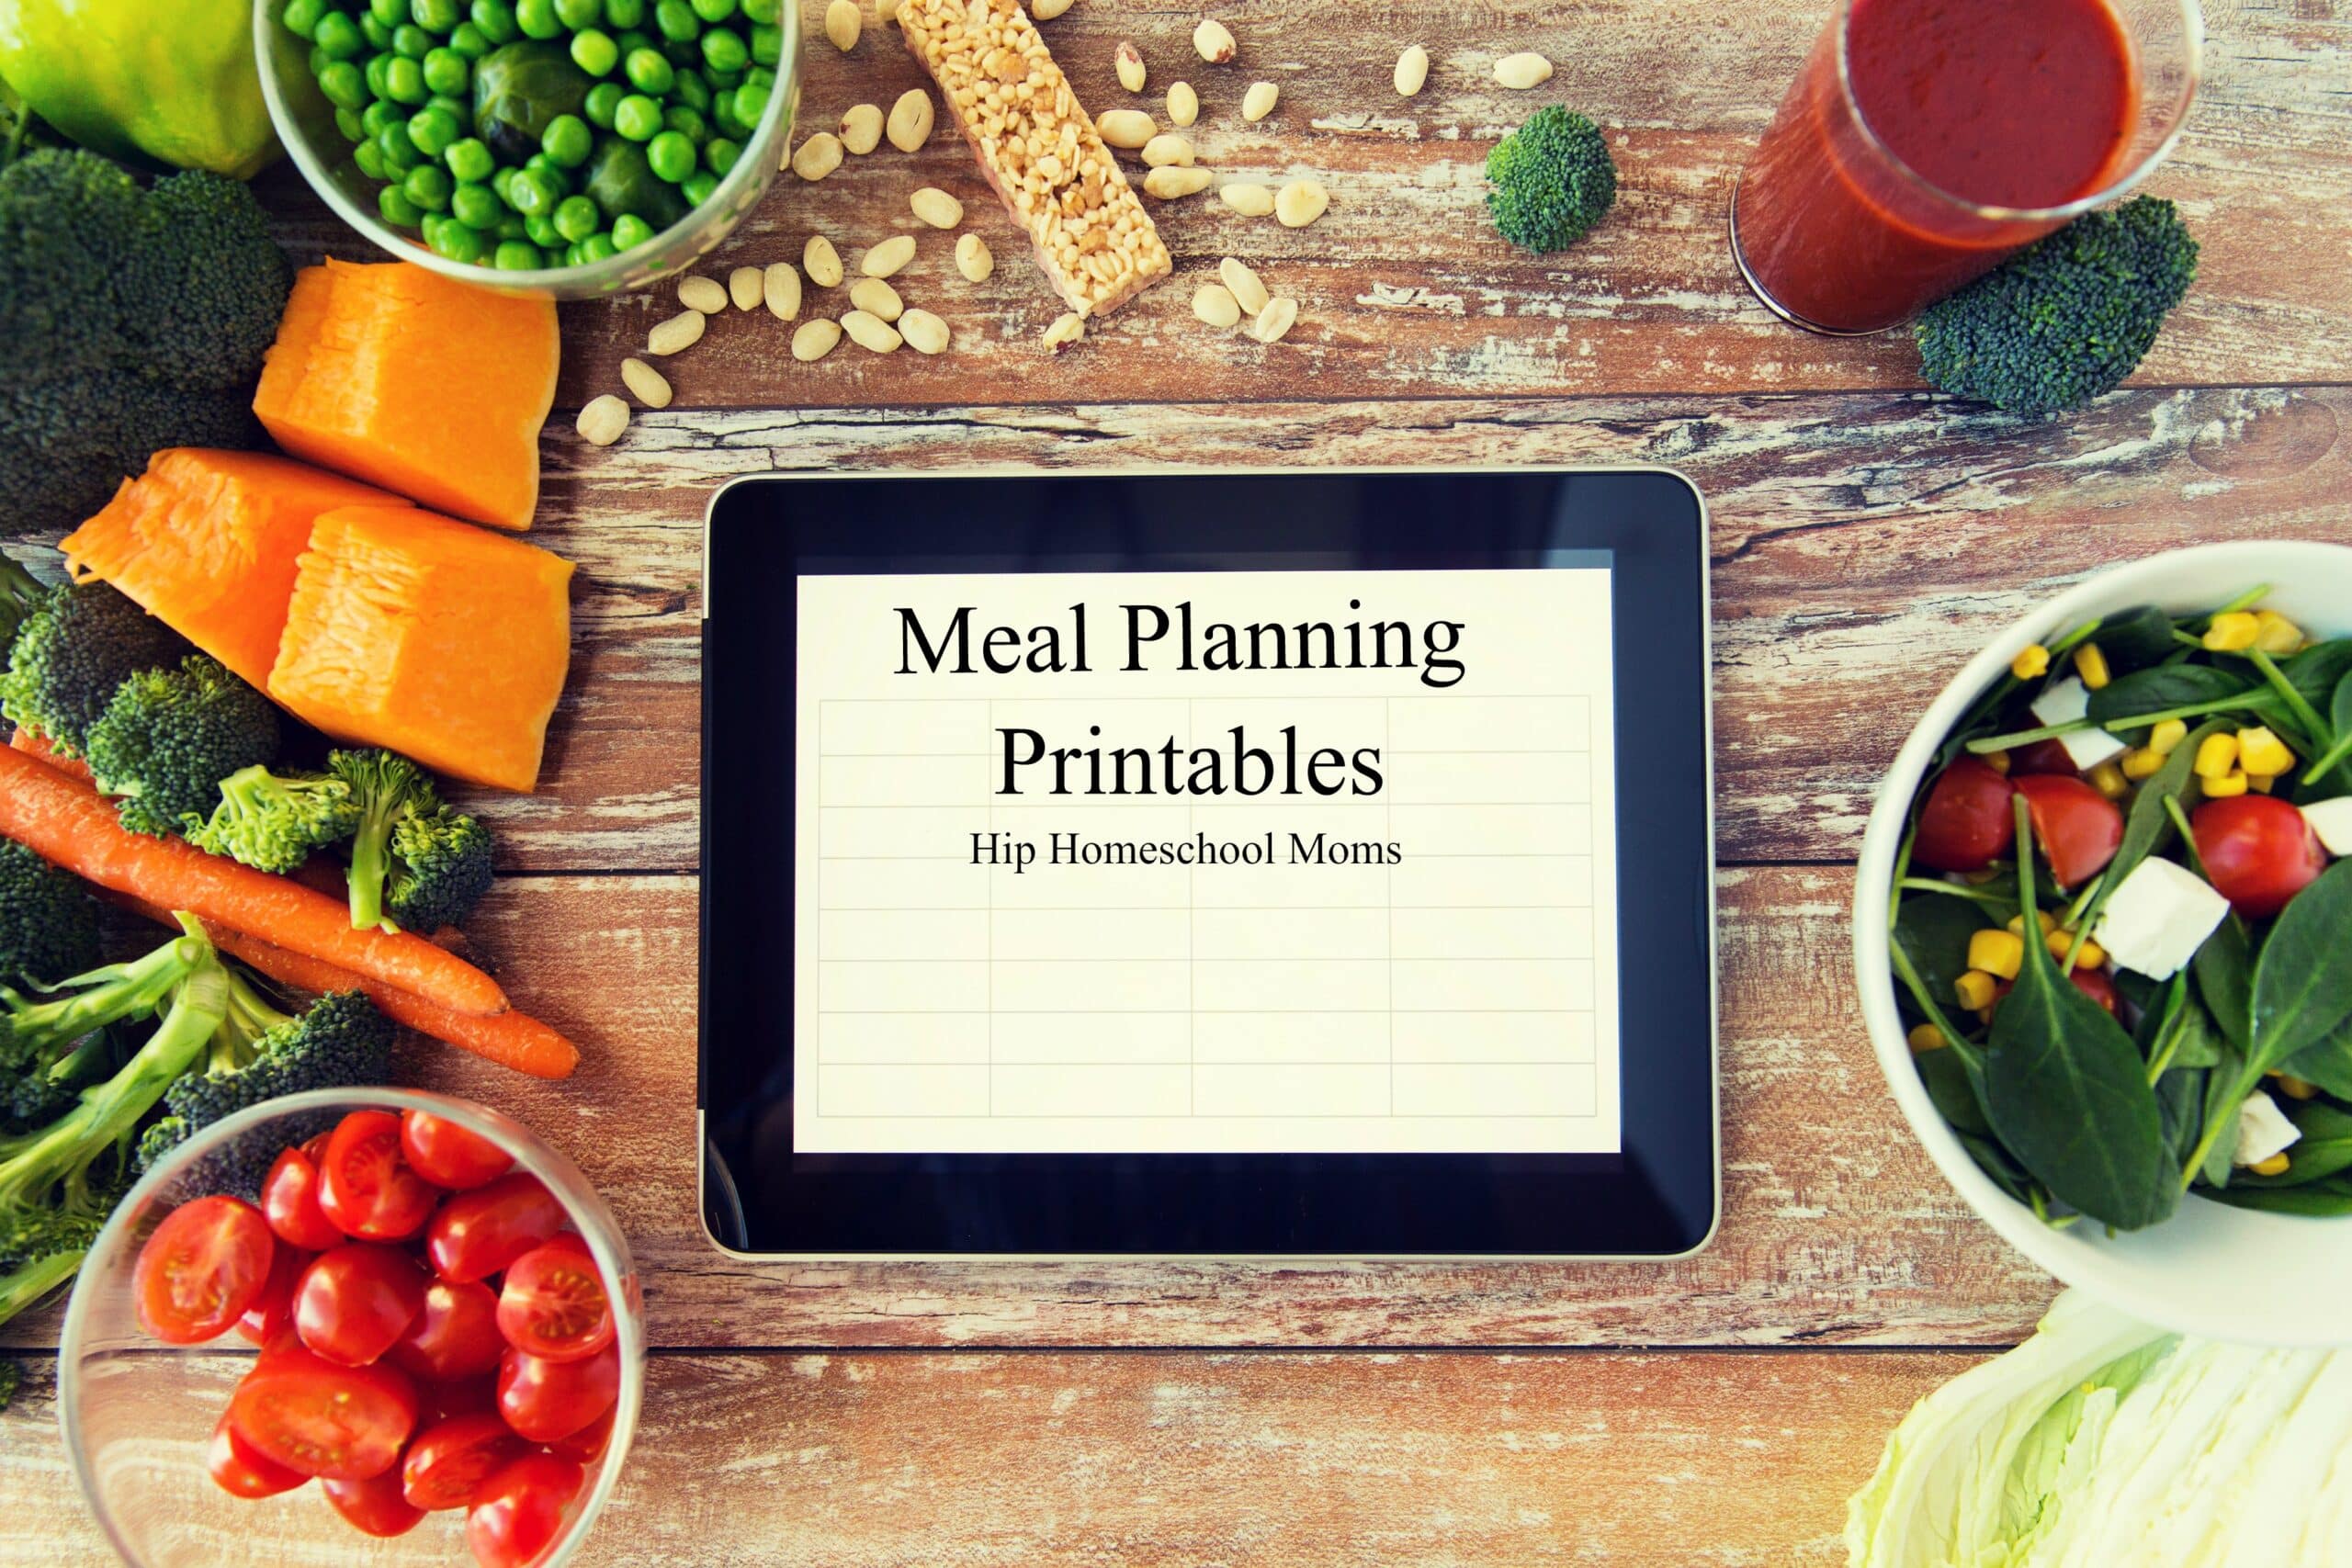 Meal Planning Printables and Ideas